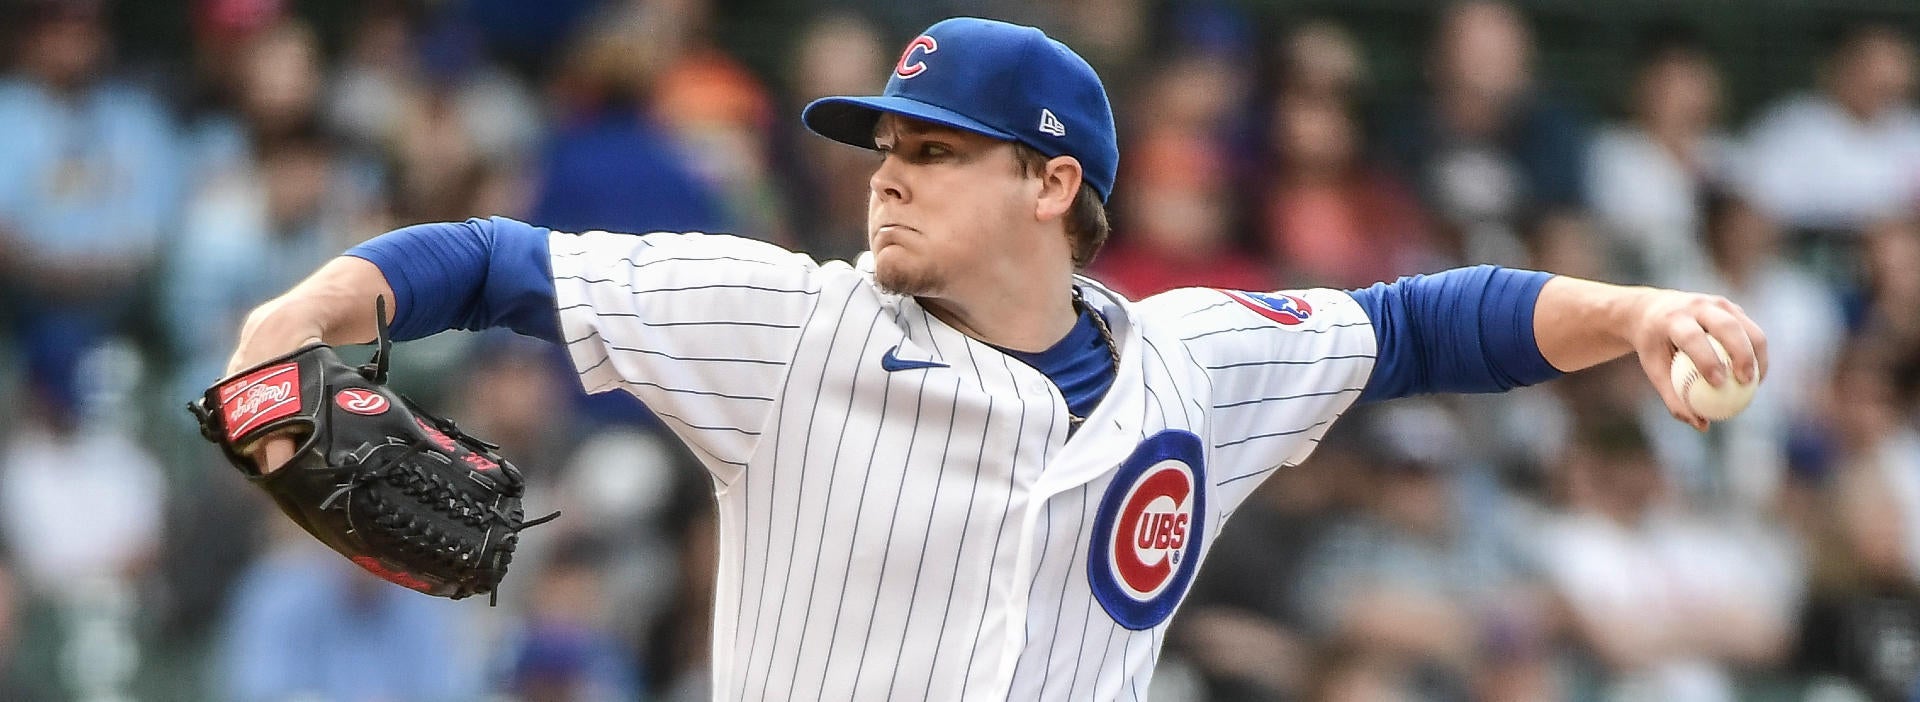 Pirates vs. Cubs Wednesday MLB probable pitchers, odds: Justin Steele moved up in rotation, but 2023 NL Cy Young chances all but gone